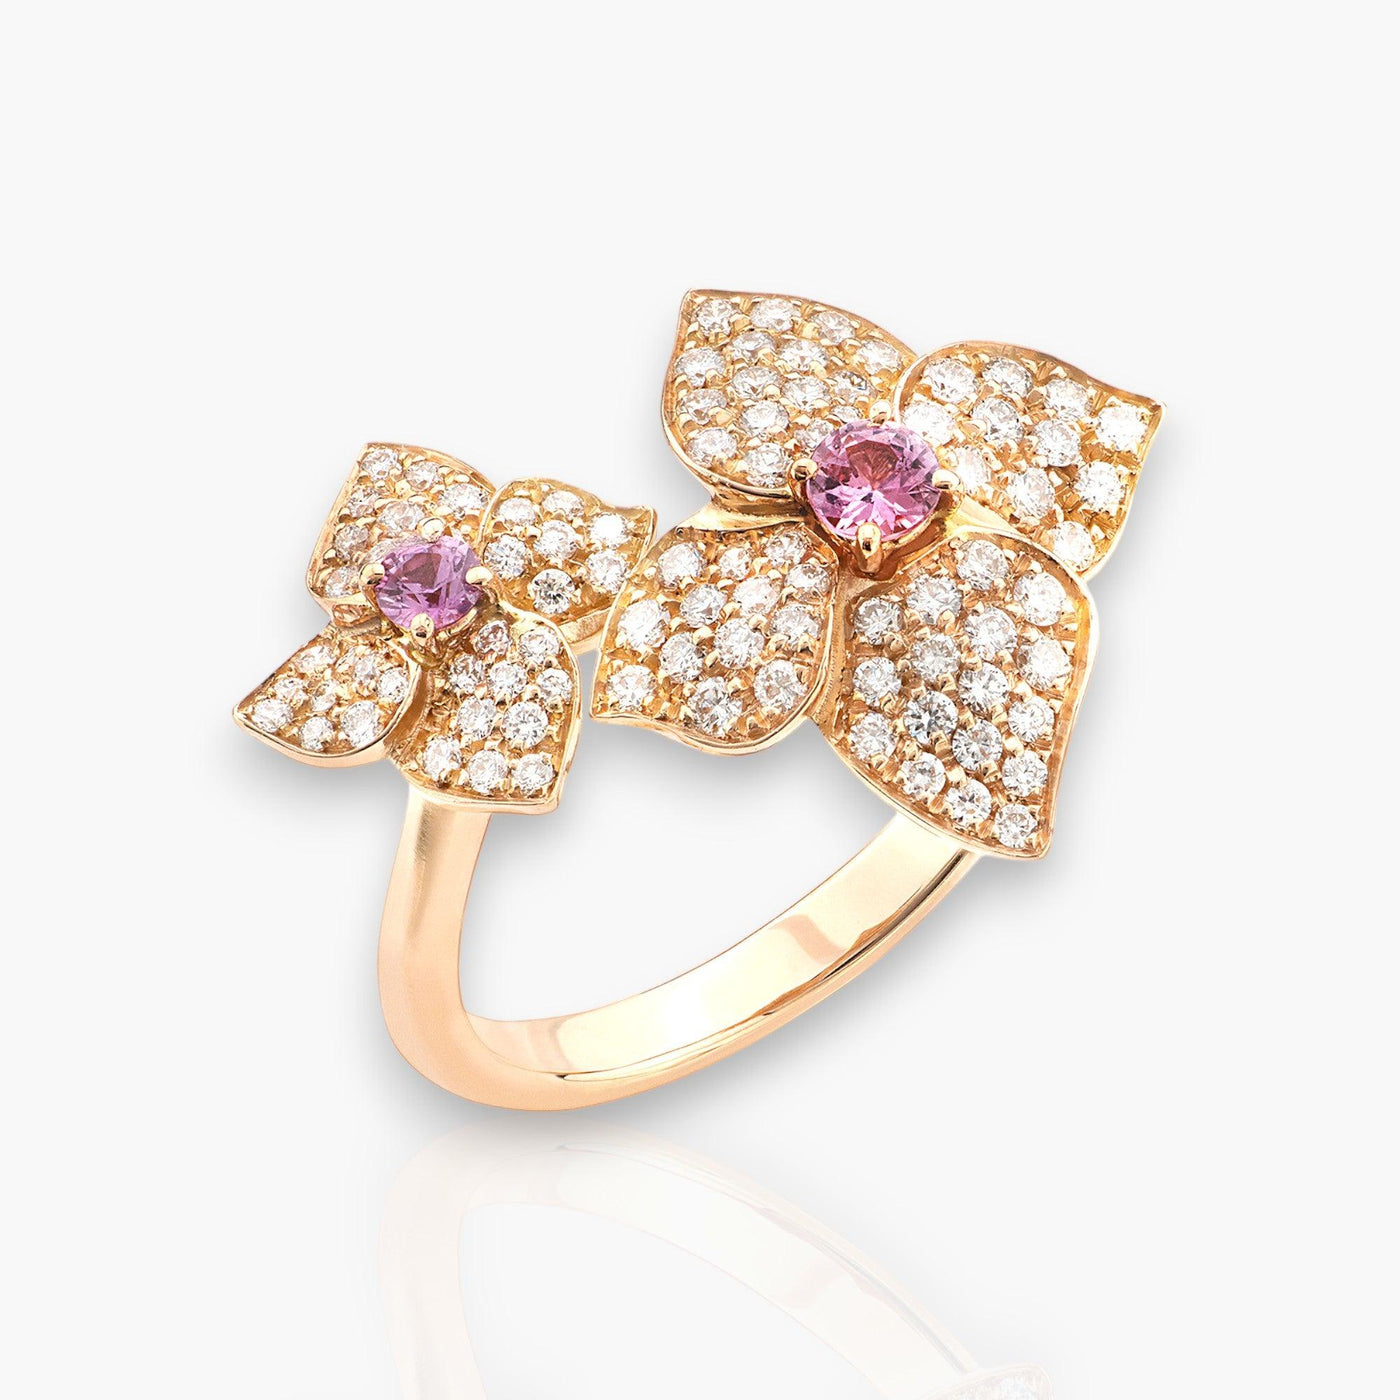 Ortensia Ring Double Flower, Rose Gold, Diamonds And Pink Sapphire - Moregola Fine Jewelry